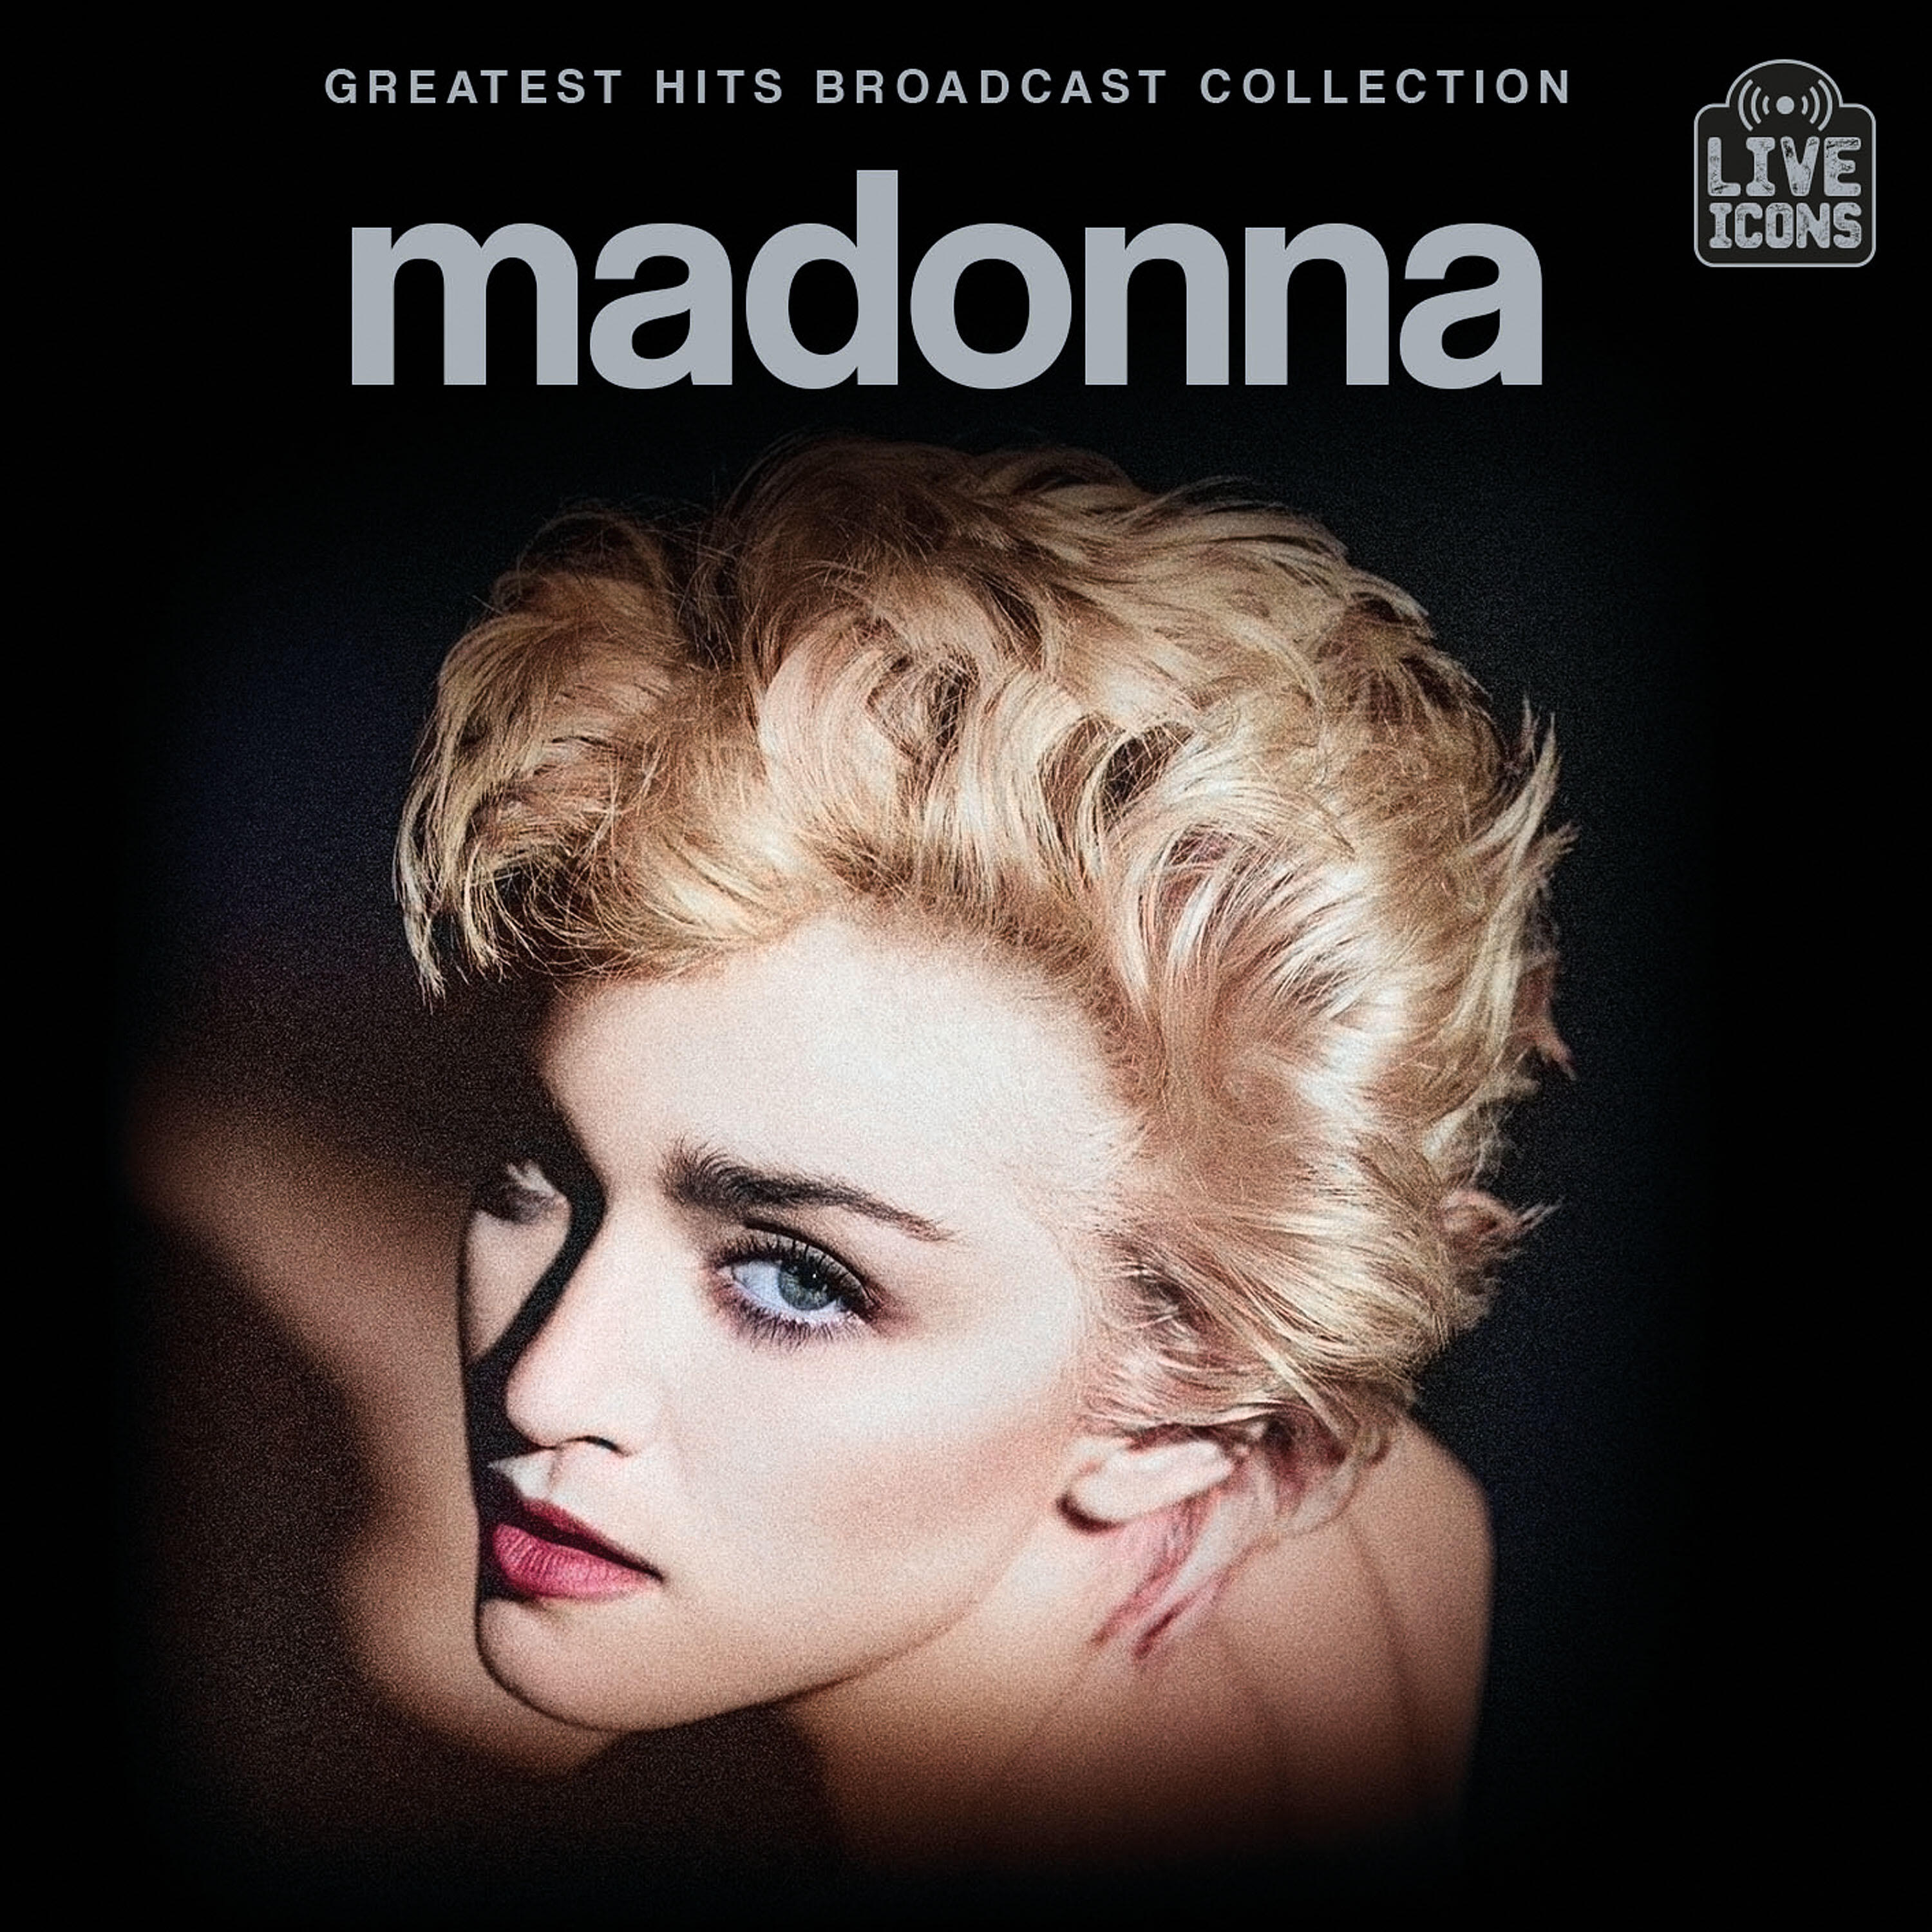 Madonna - Greatest Hits Broadcast Collection | iHeart